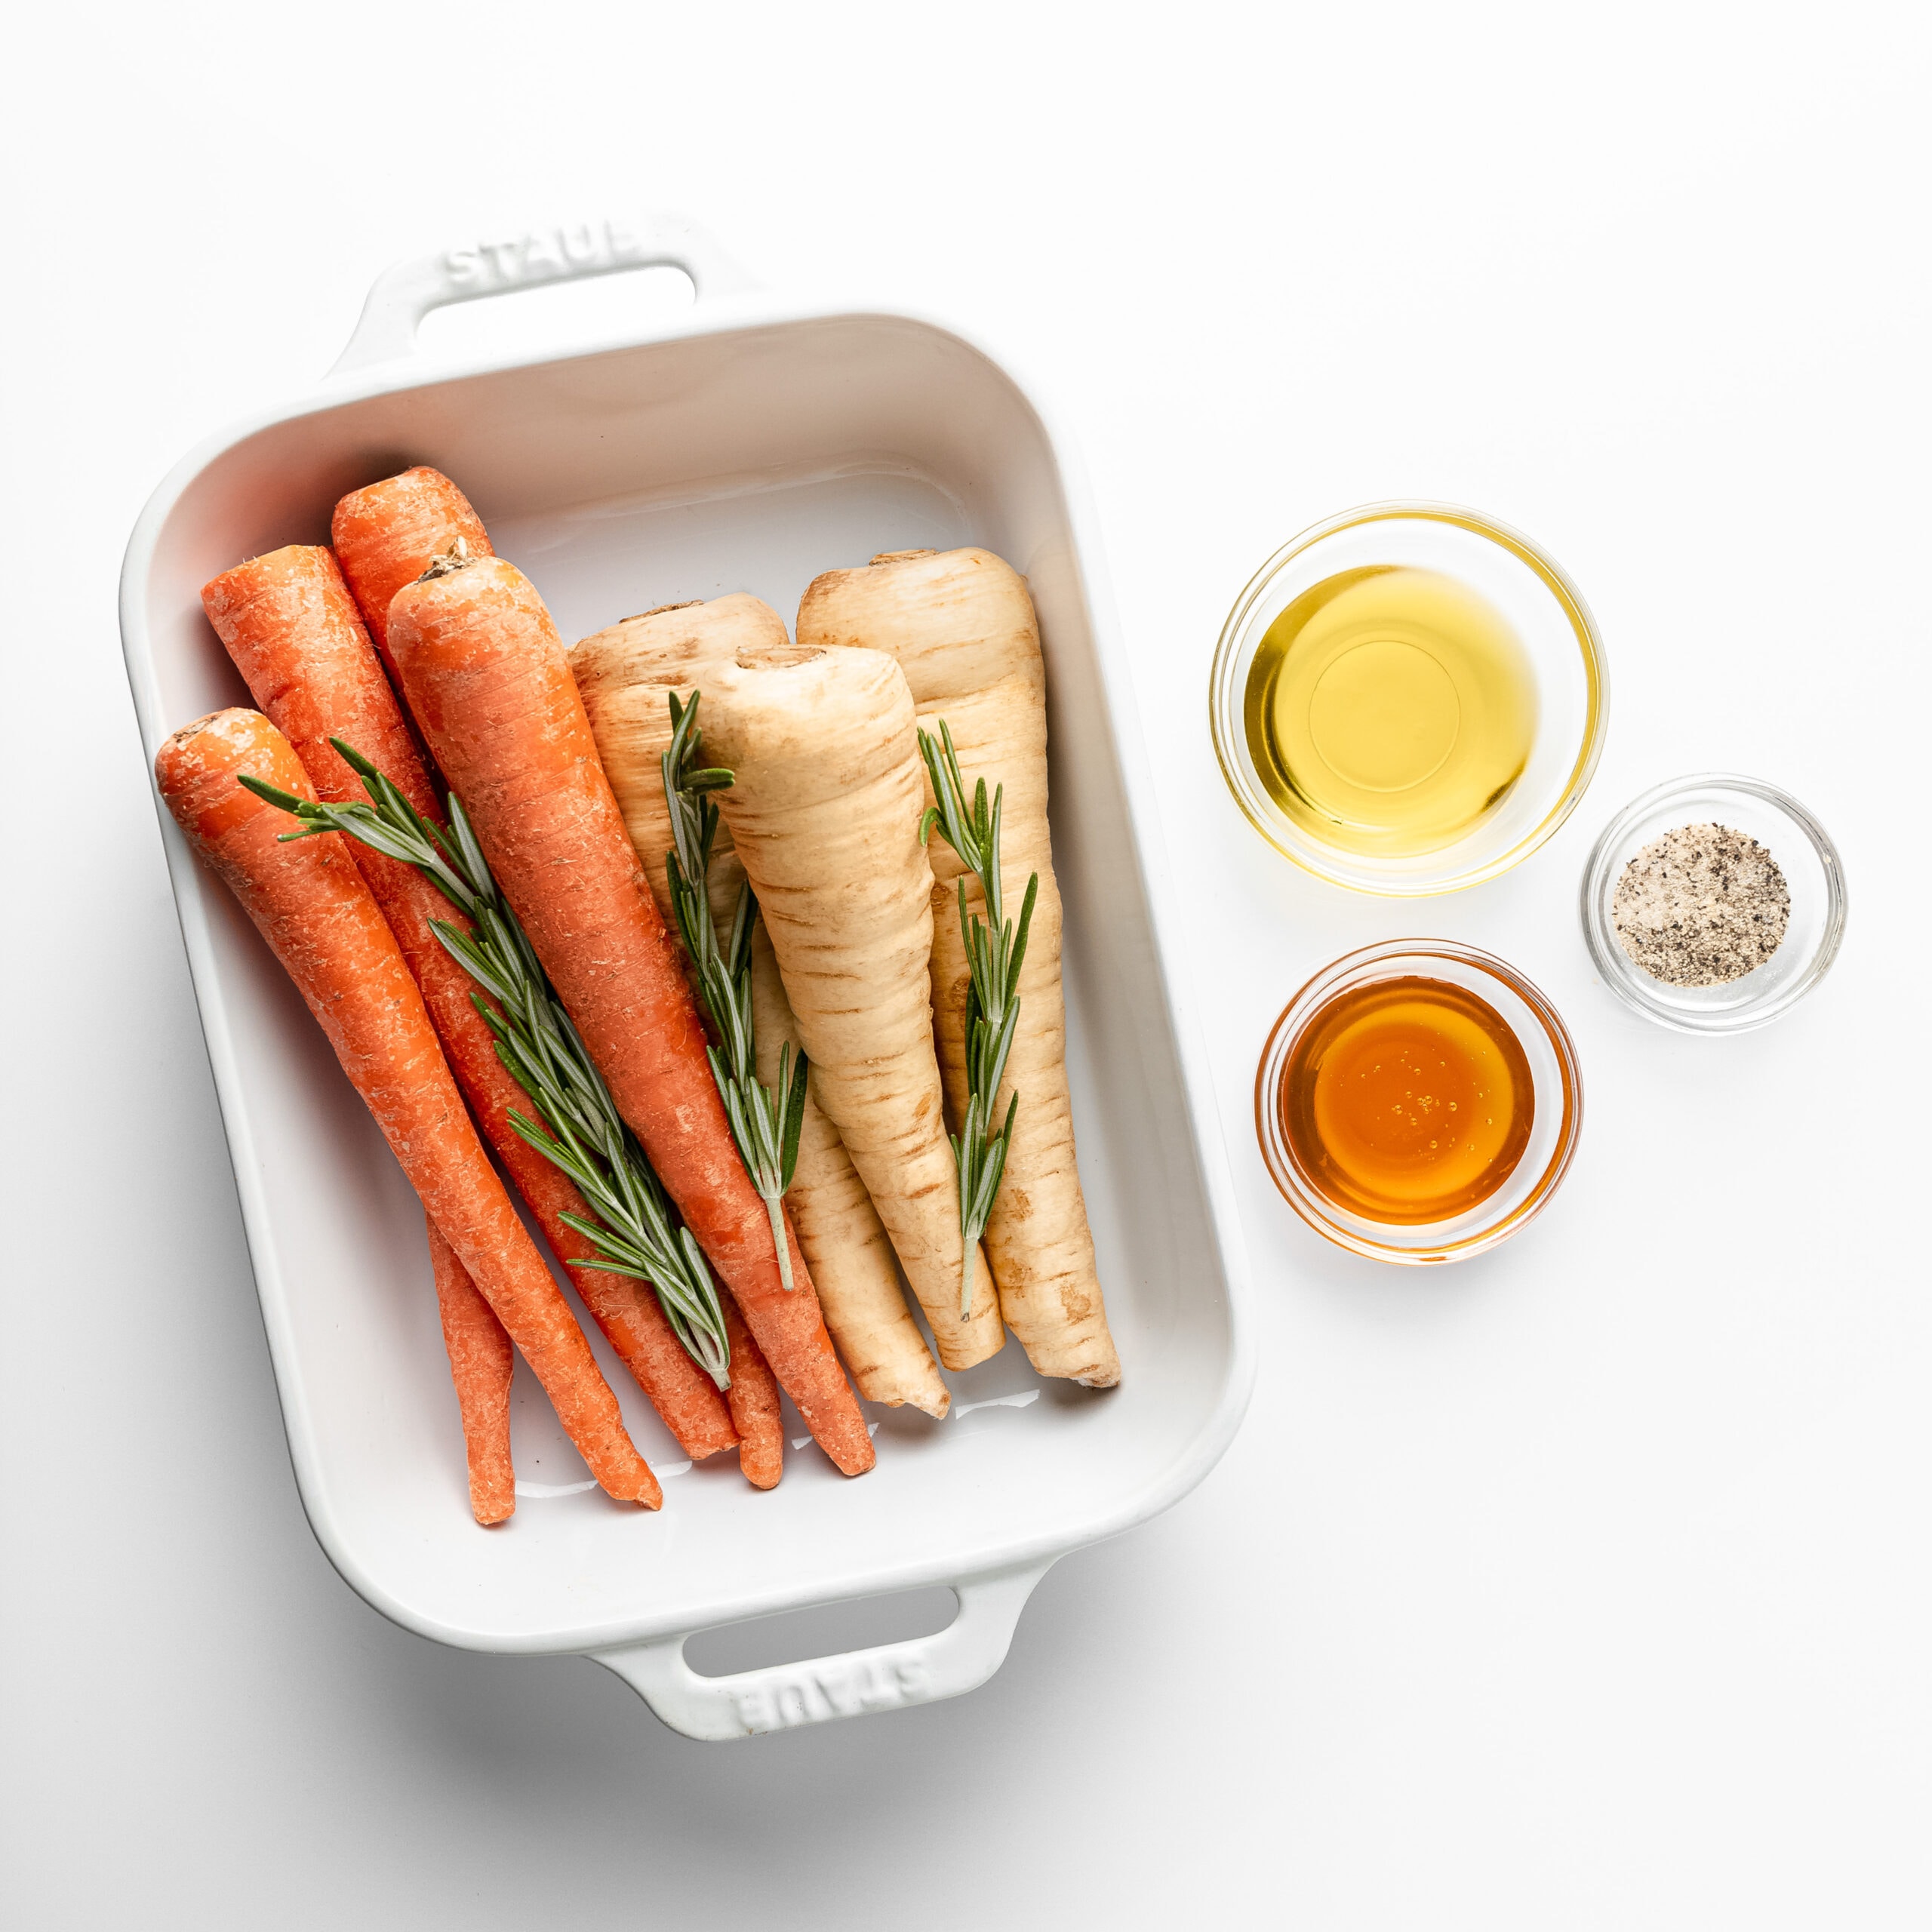 A white ceramic dish with carrots, parsnips, and fresh rosemary. Off to the side of the dermaic dish are three glass bowls filled with olive oil, spices, and honey.